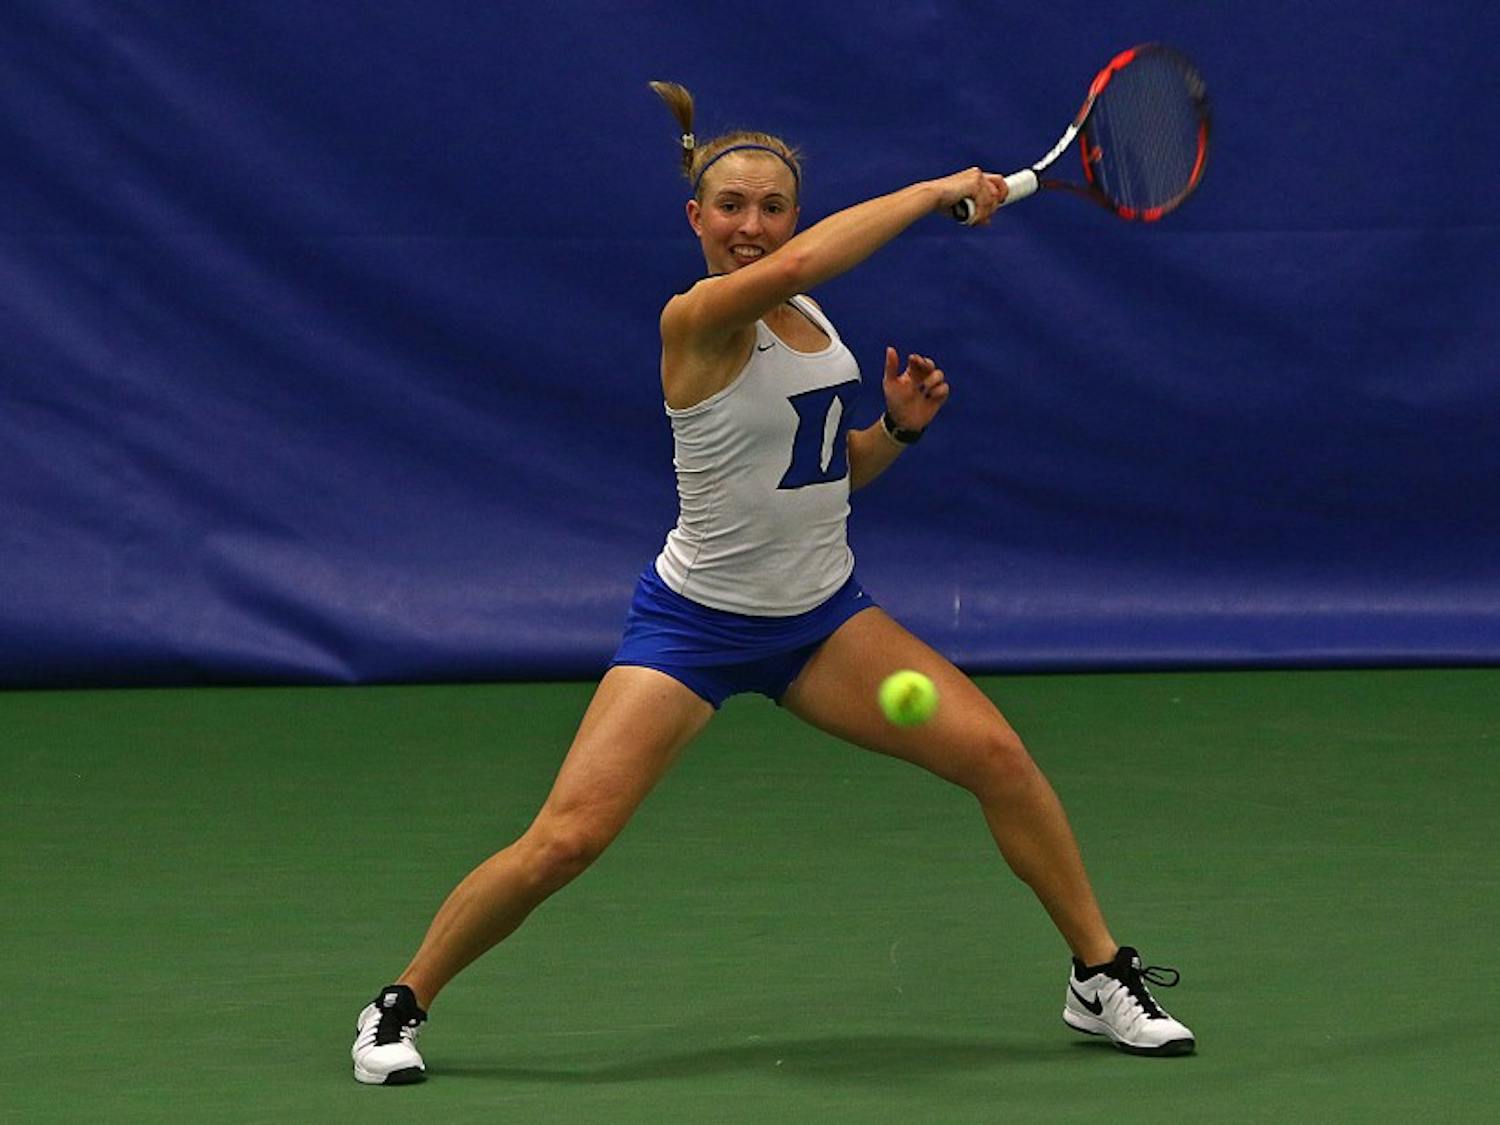 With senior Beatrice Capra unable to play on Senior Day due to illness, freshman Ellyse Hamlin stepped up and clinched a Duke win for the second straight match Tuesday.